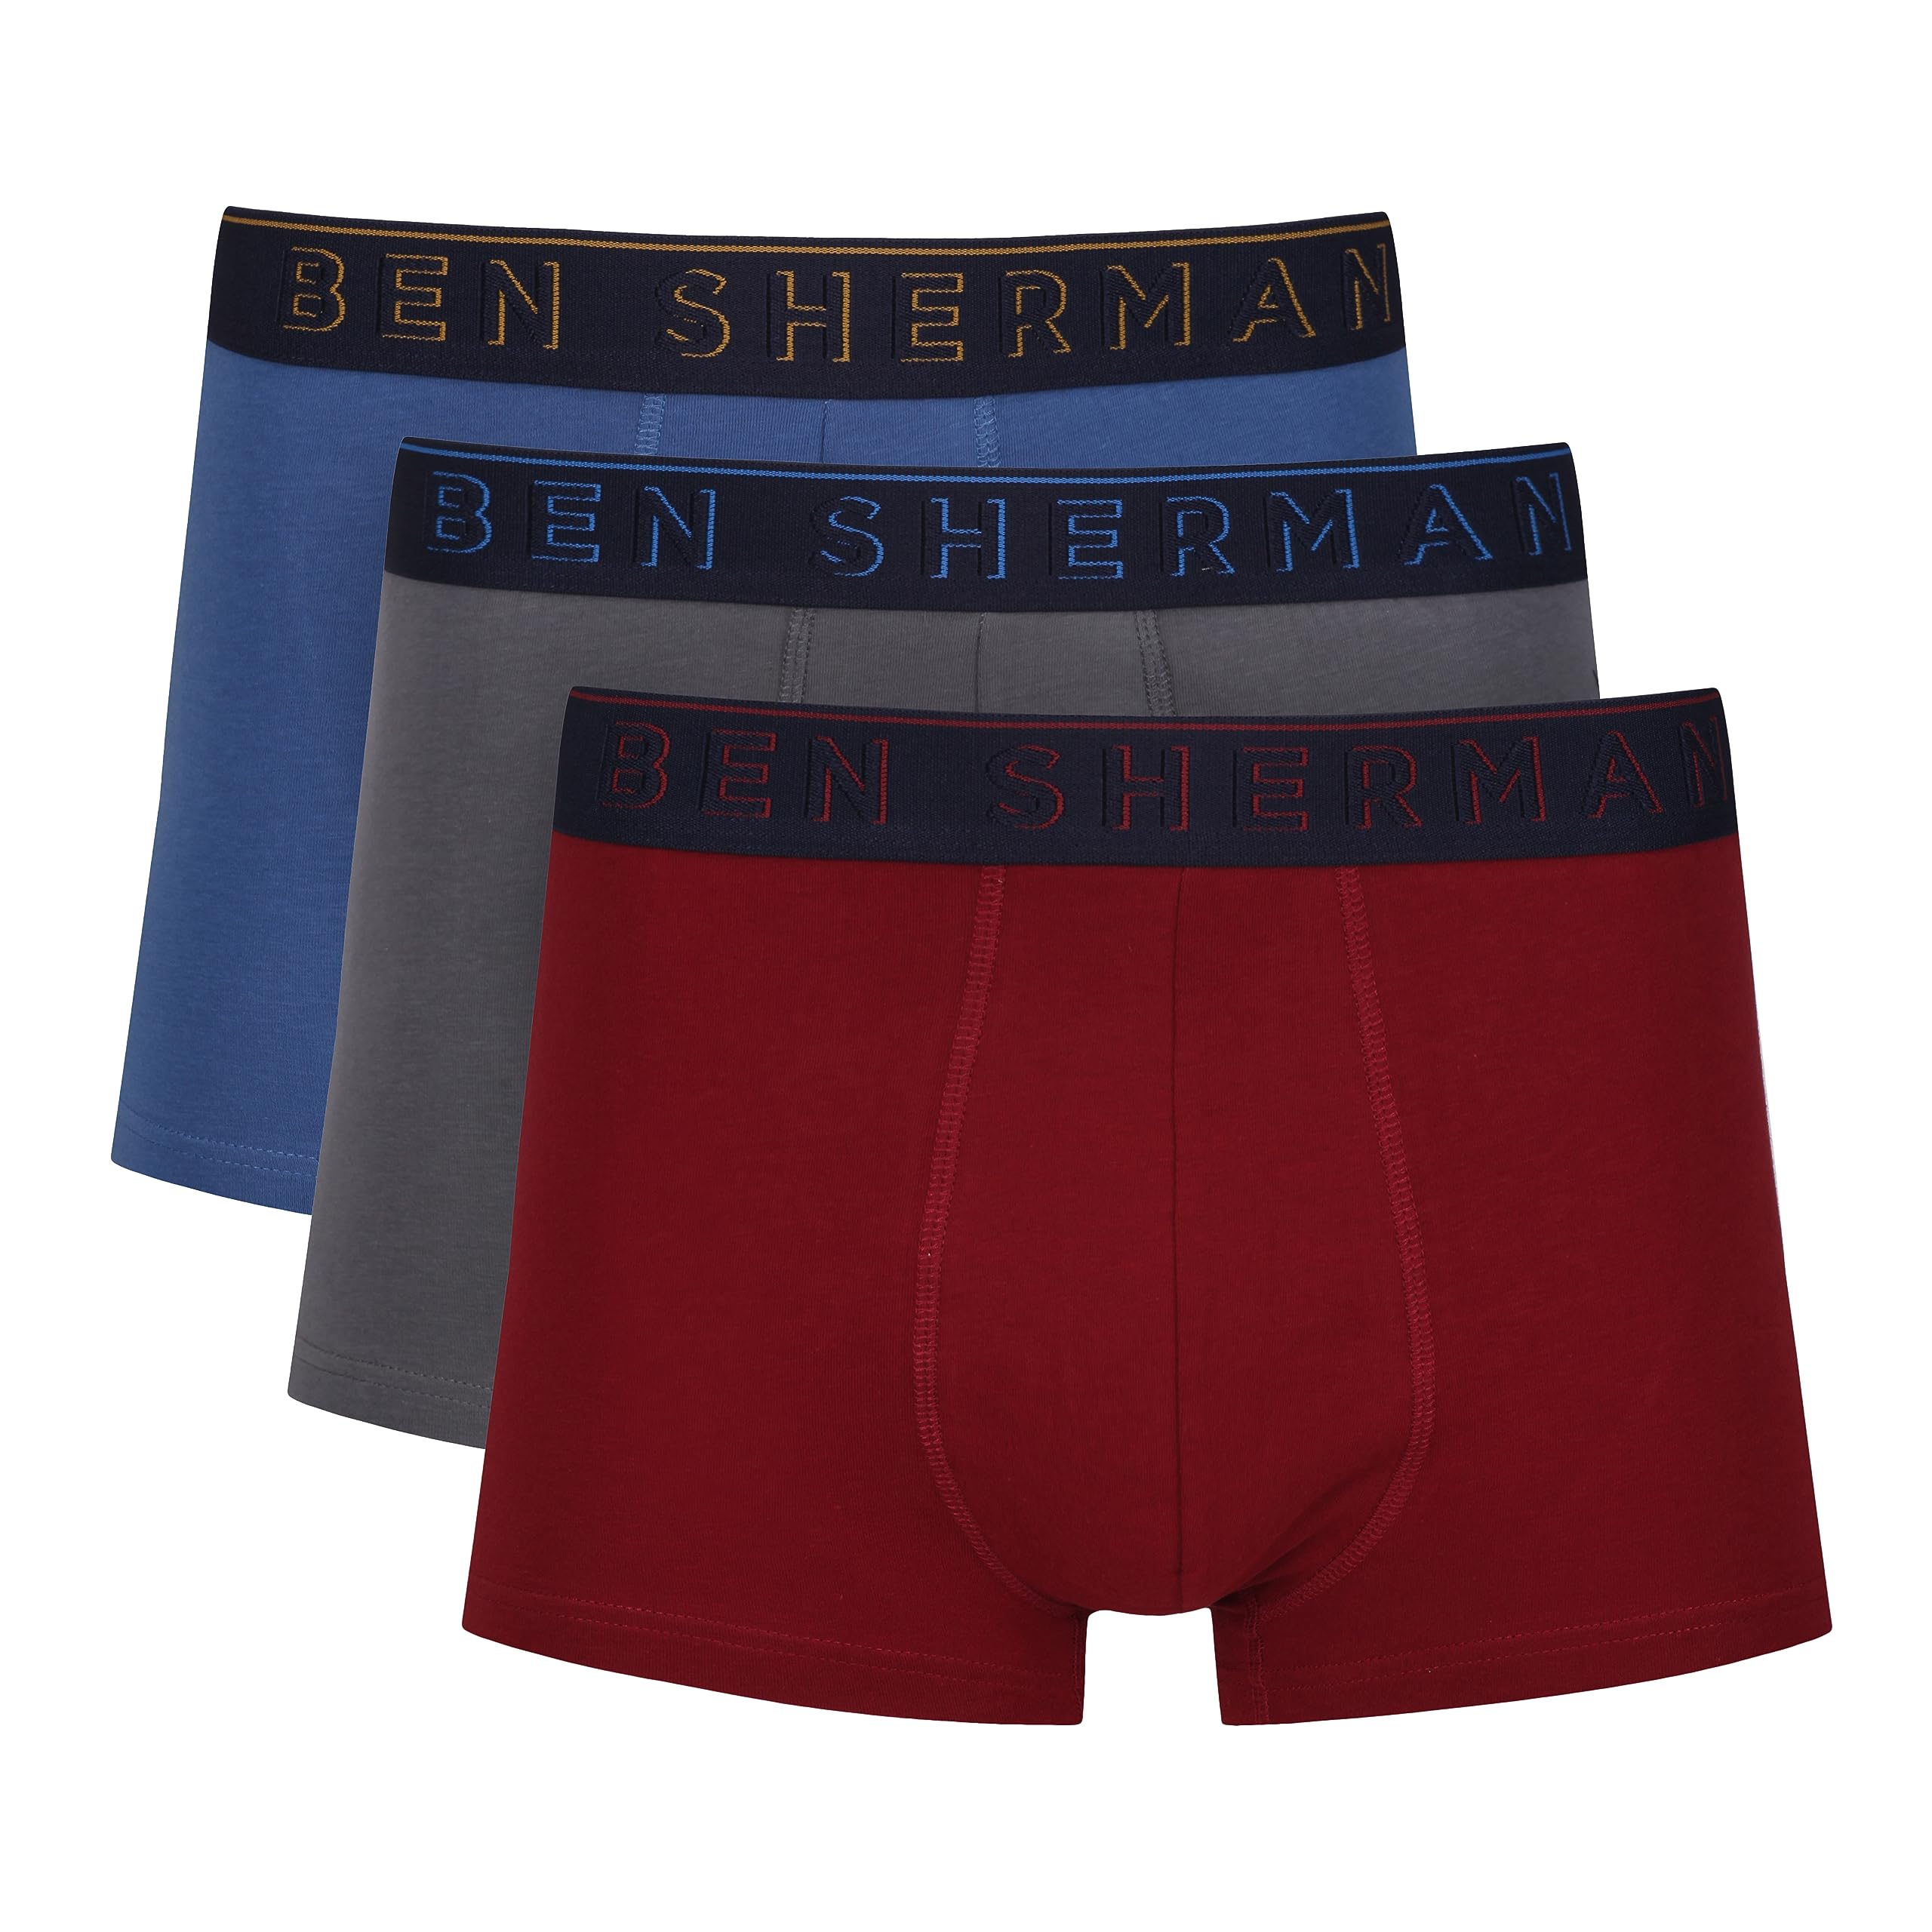 Ben Sherman Herren Men's Boxer Shorts in Red/Grey/Blue | Soft Touch Cotton Trunks with Elasticated Waistband Boxershorts, Red/Grey/Blue,